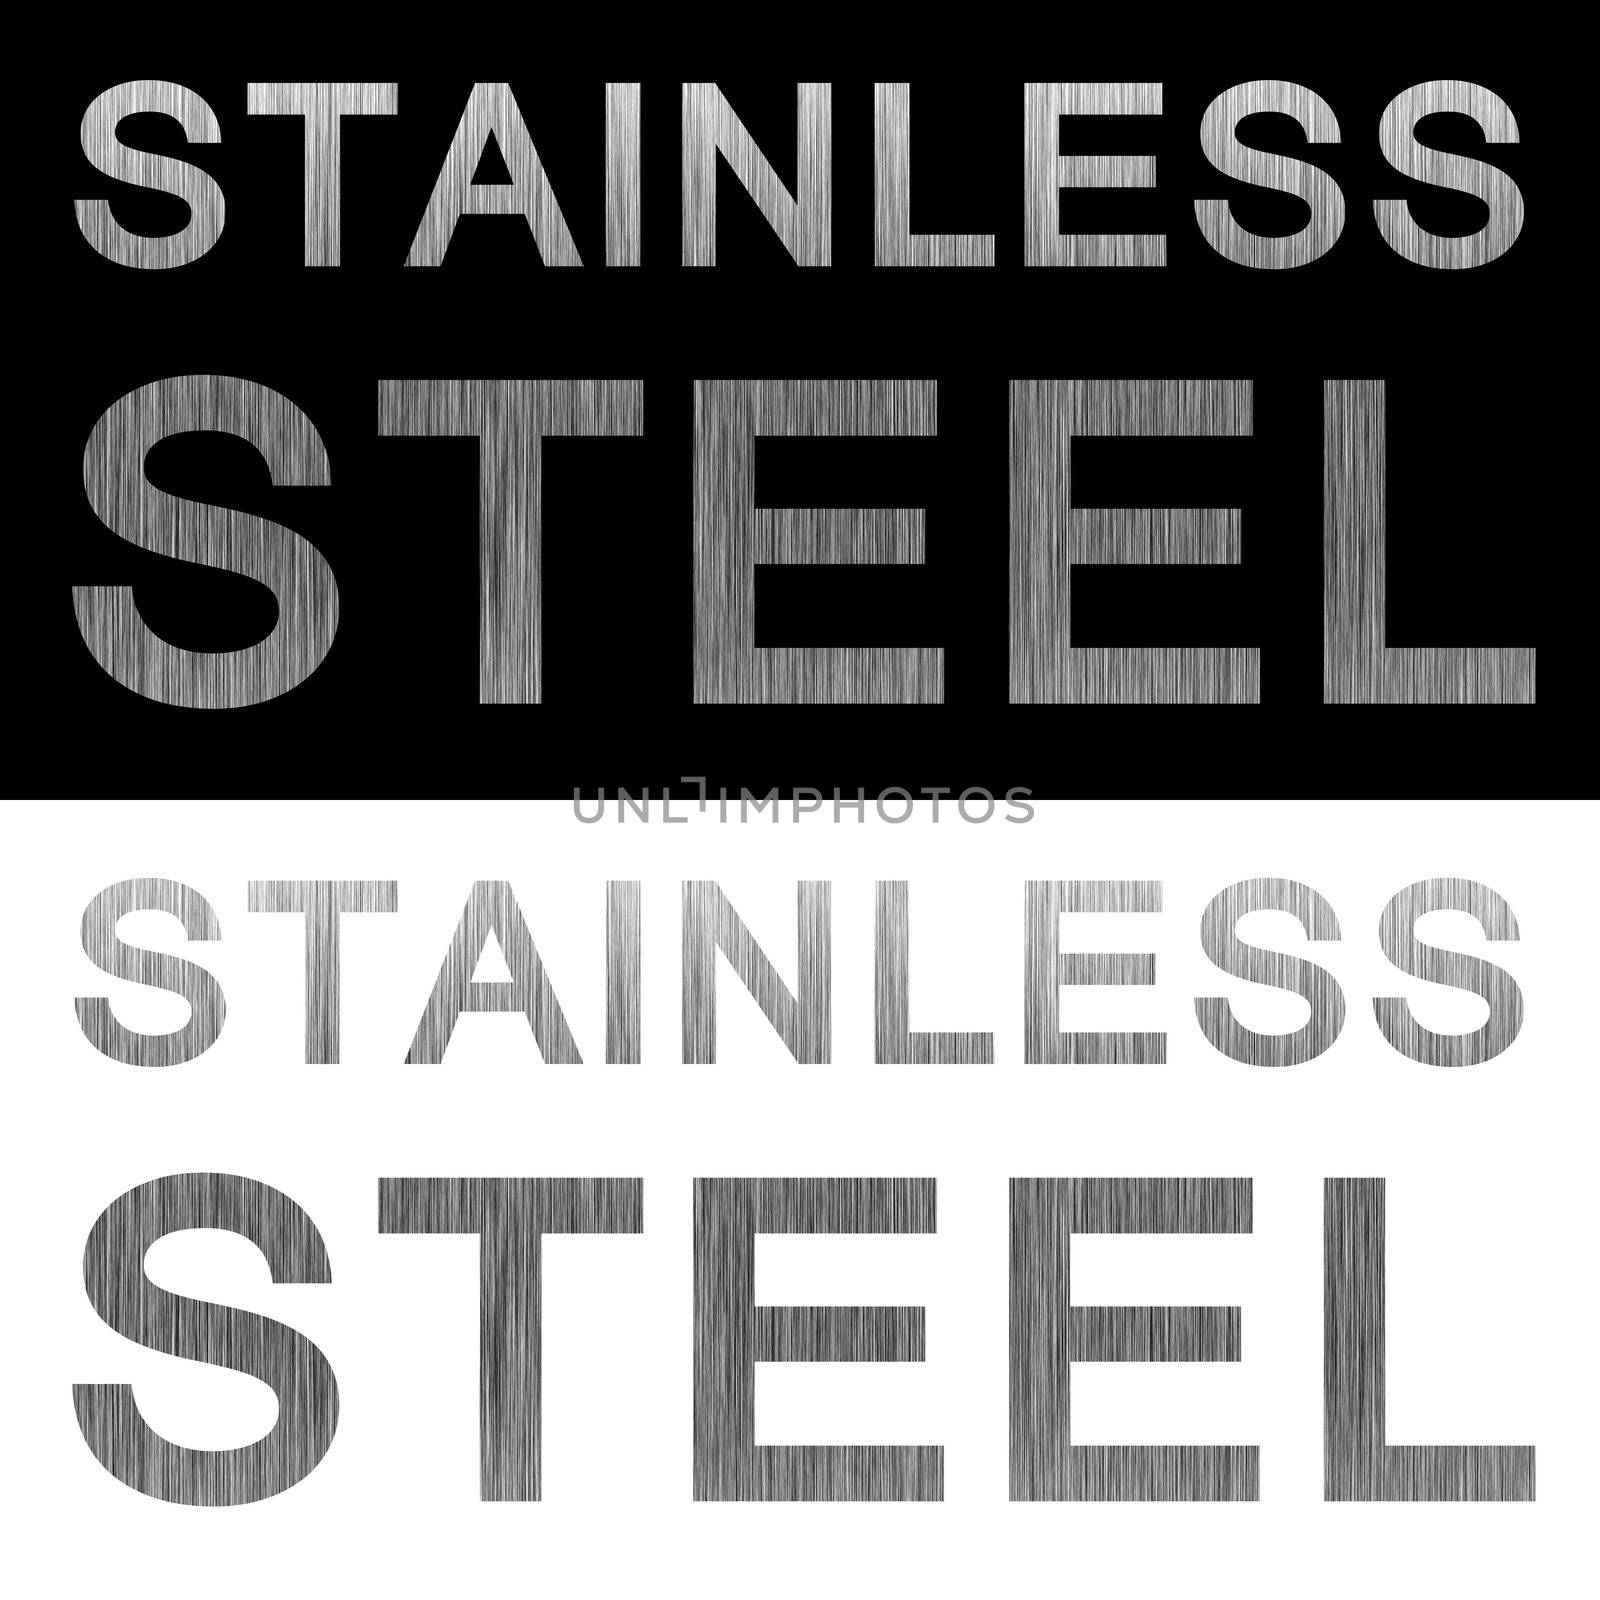 Stainless steel brushed metal texture labels isolated over black and white backgrounds.